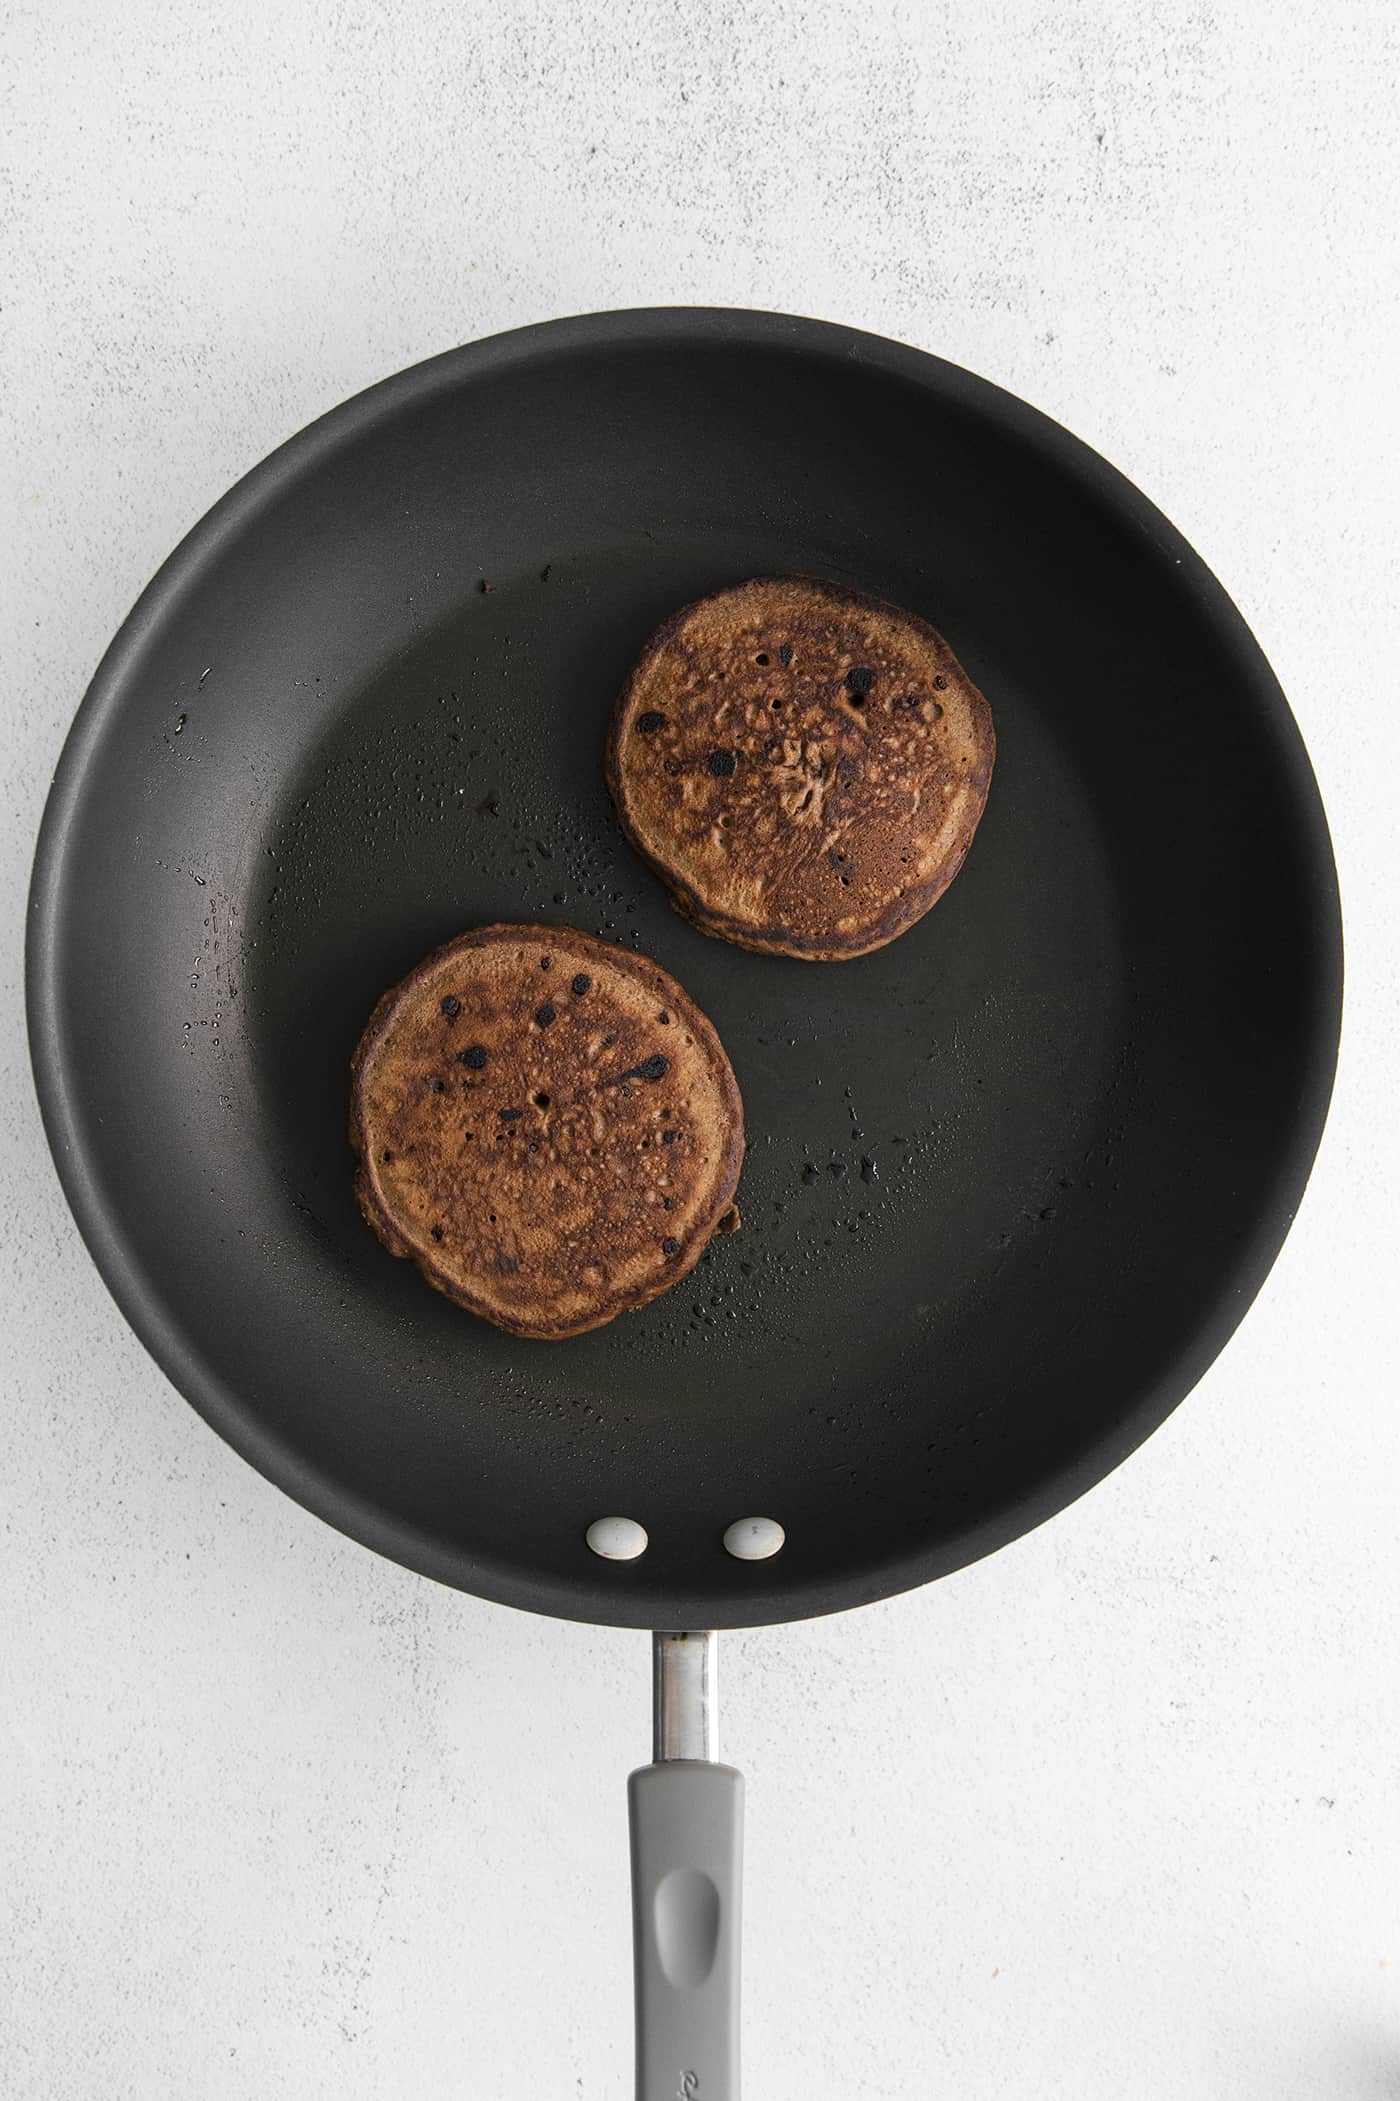 Two chocolate pancakes in a skillet